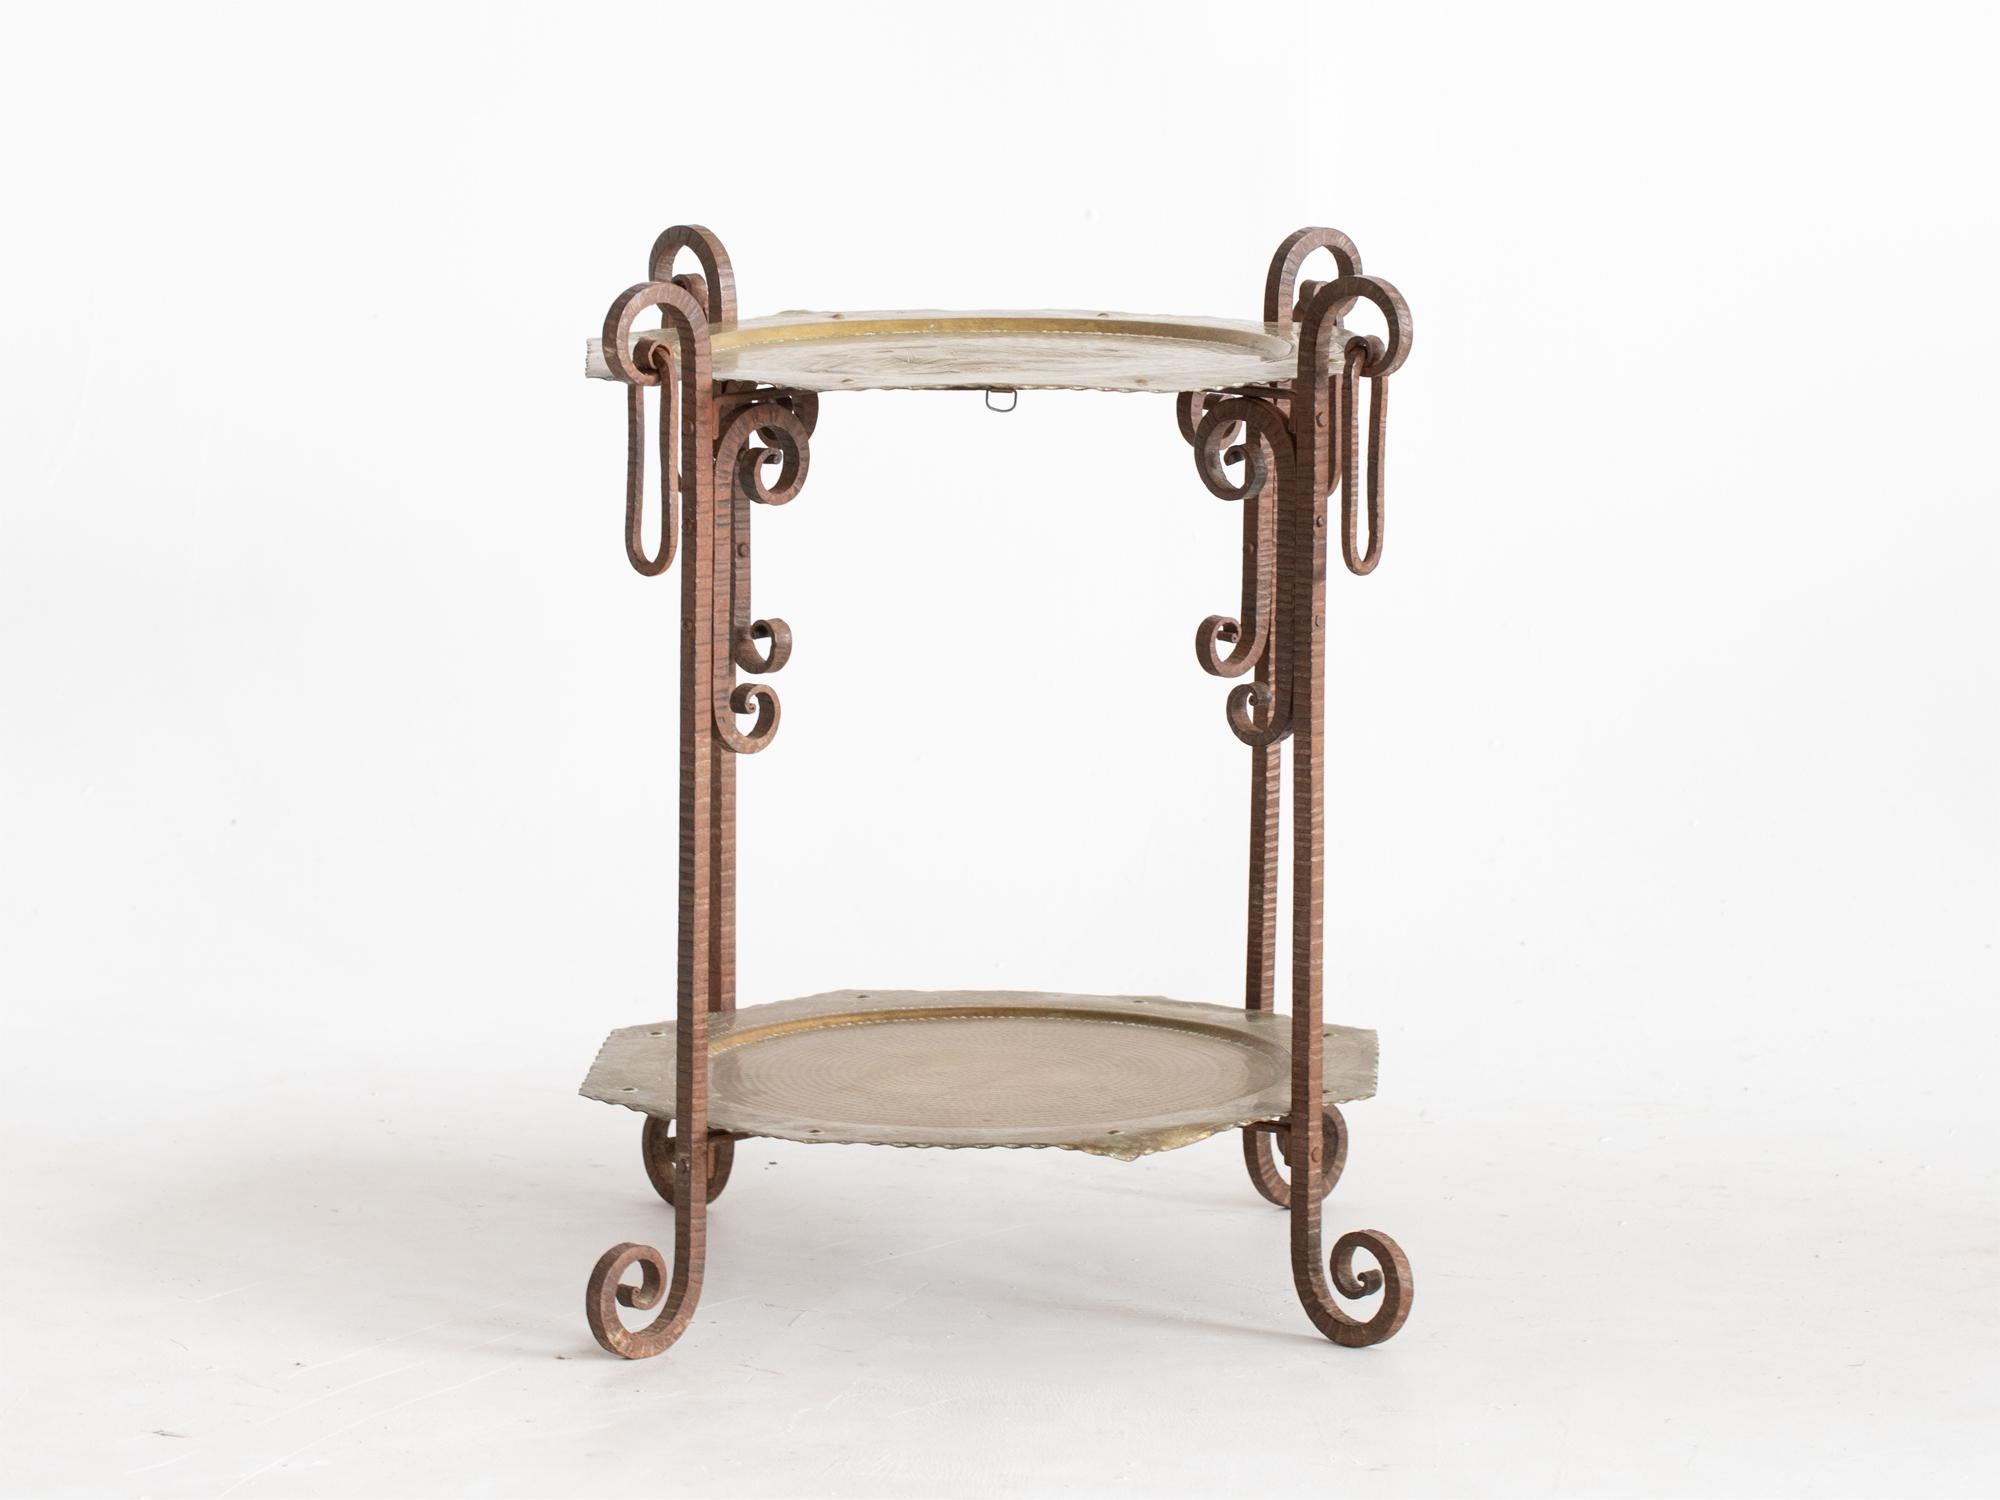 A forged iron and hammered brass tray table. Moroccan, early-mid 20C.

Stock ref. #2243

In good sturdy order with patinated surface. Folds away when not in use.

65 x 50 x 50 cm

25.6 x 19.7 x 19.7 